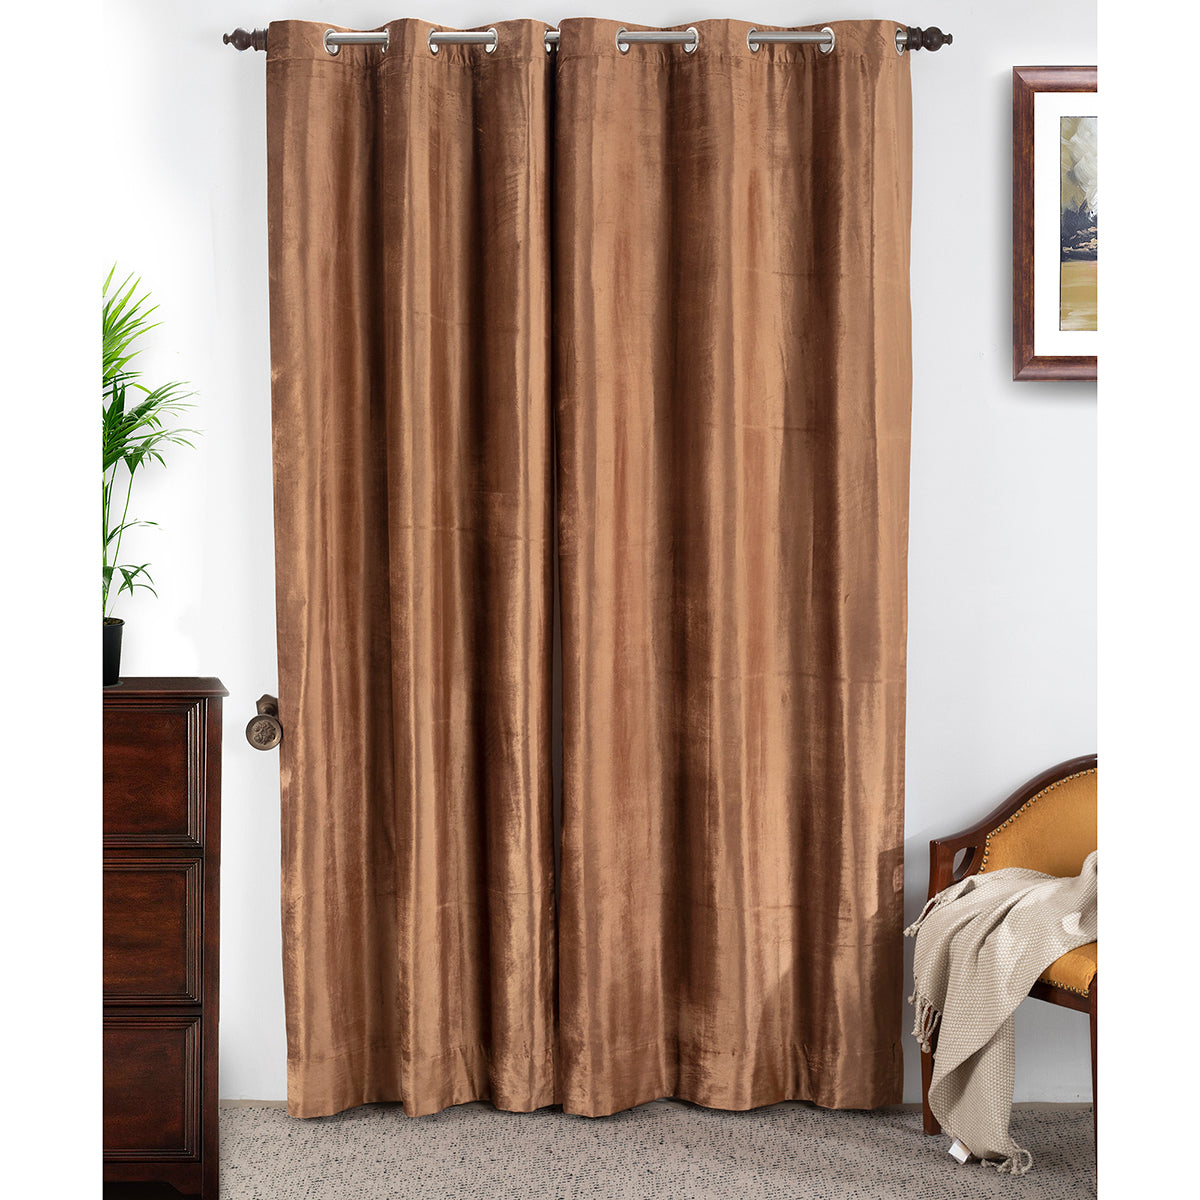 Silky Sillion Solid 2PC Gold Curtain Set